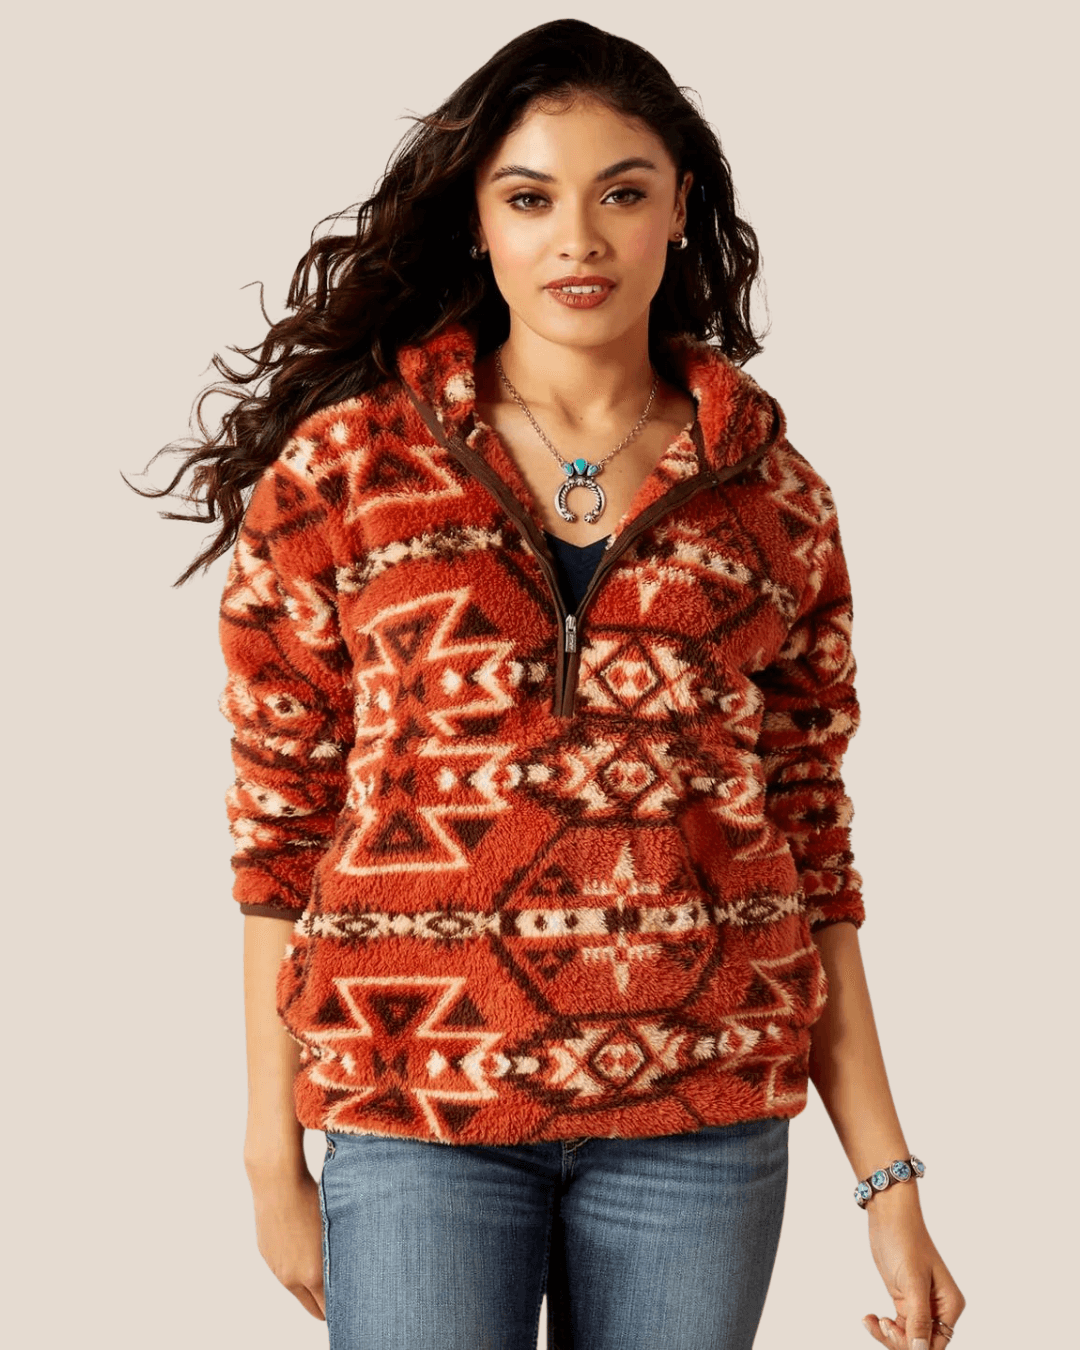 Plus-Size Women’s Western Clothing - Painted Cowgirl Western Store